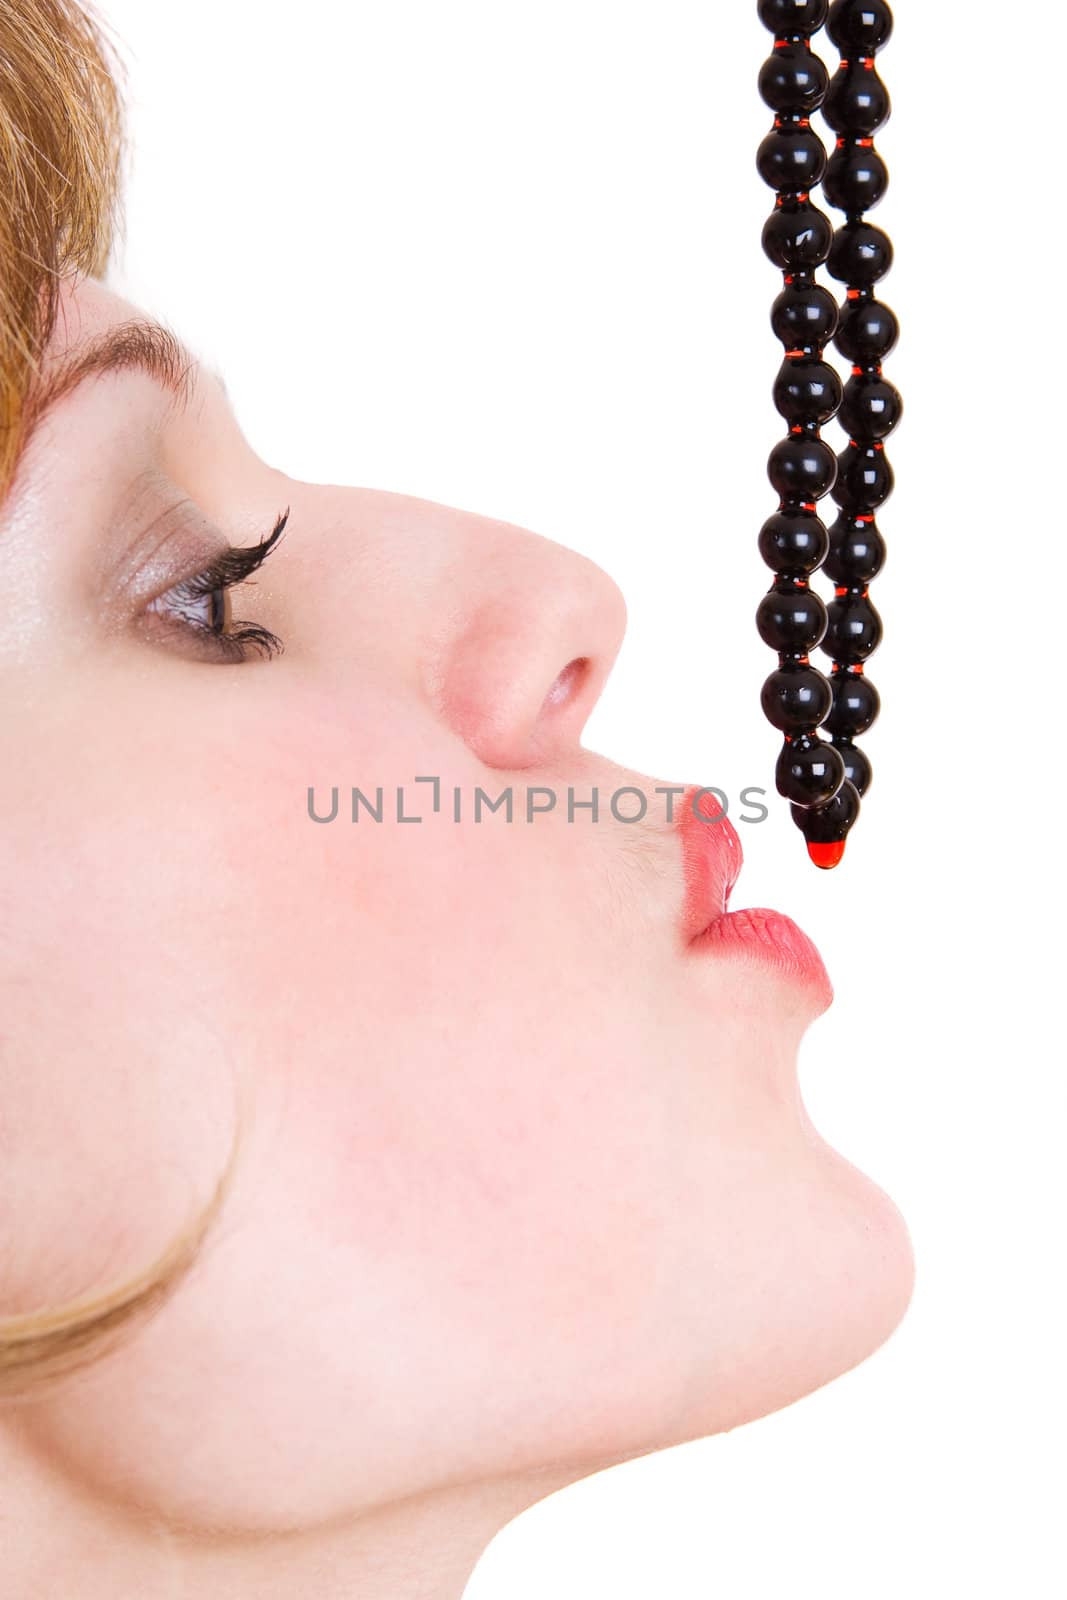 The girl catches with lips a drop of wine on beads